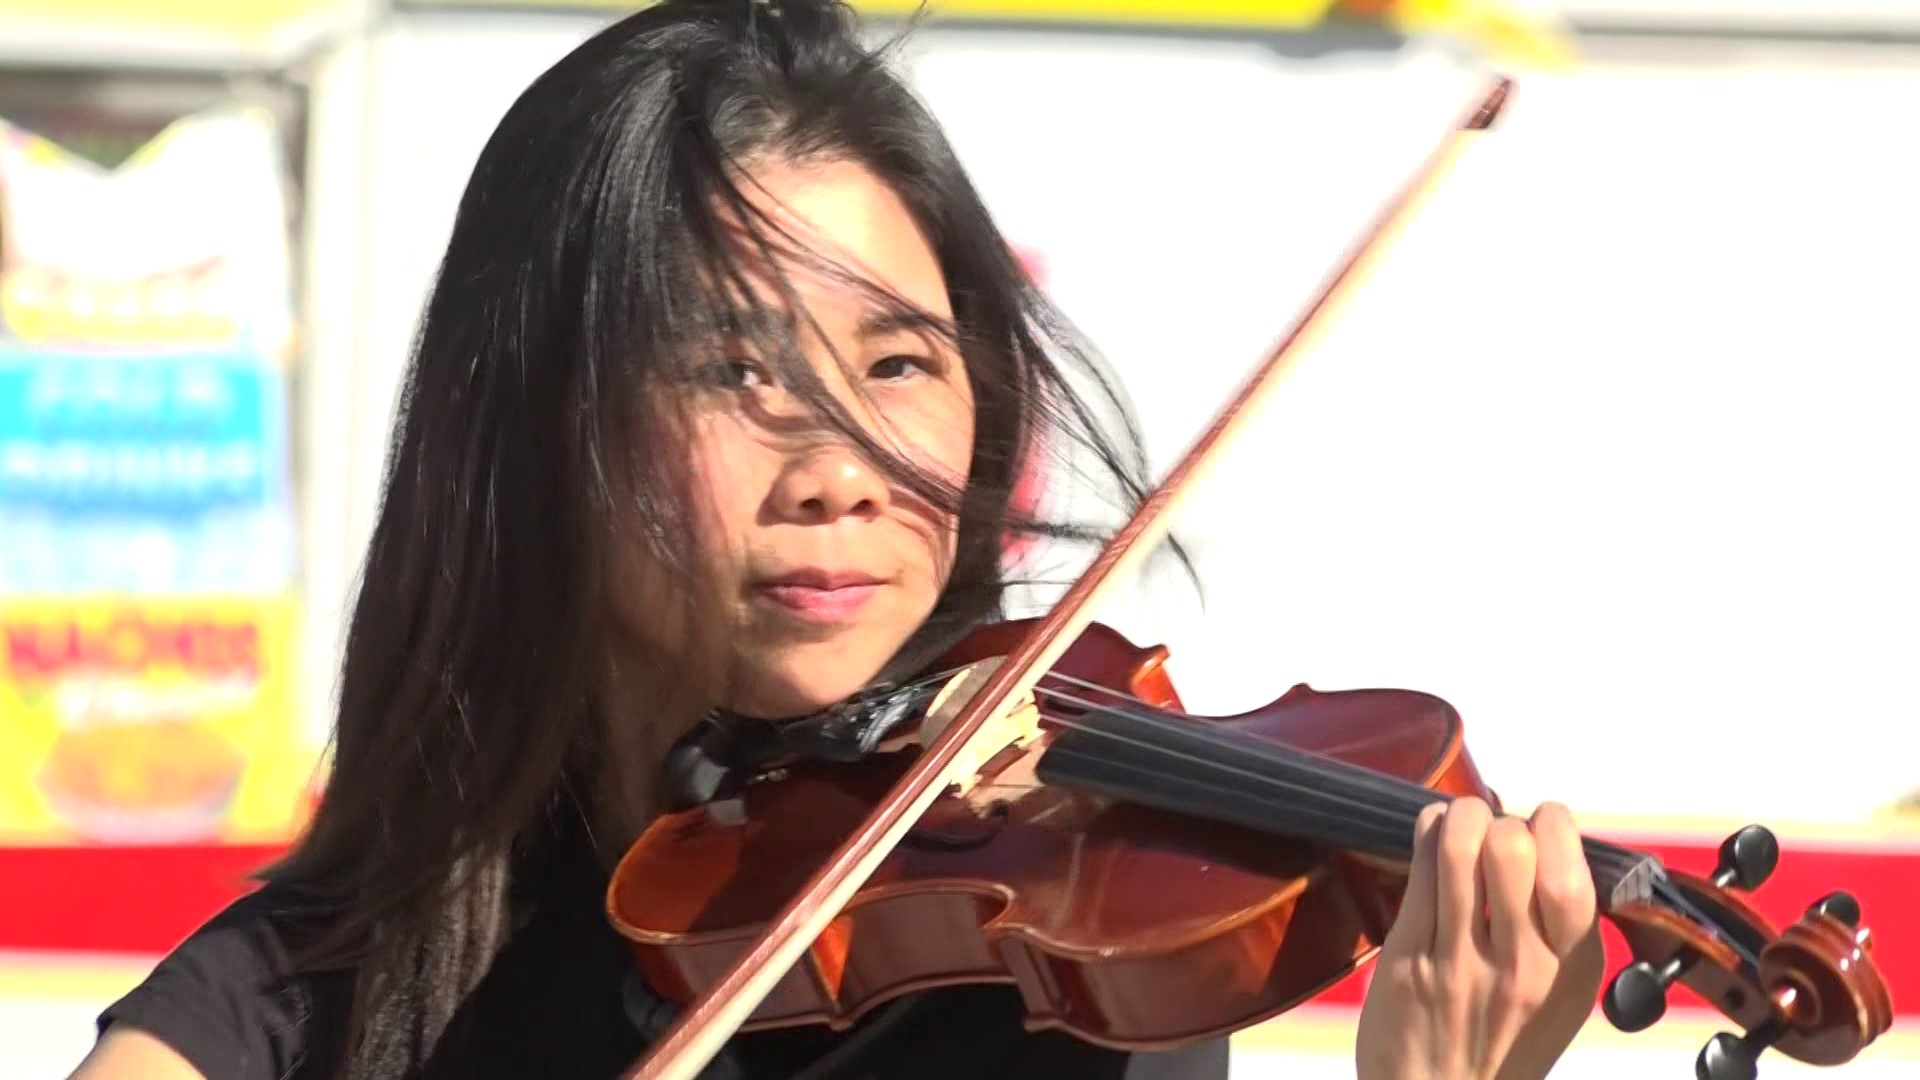 Tu had been training her violin skills her entire life before moving to Eureka Springs.